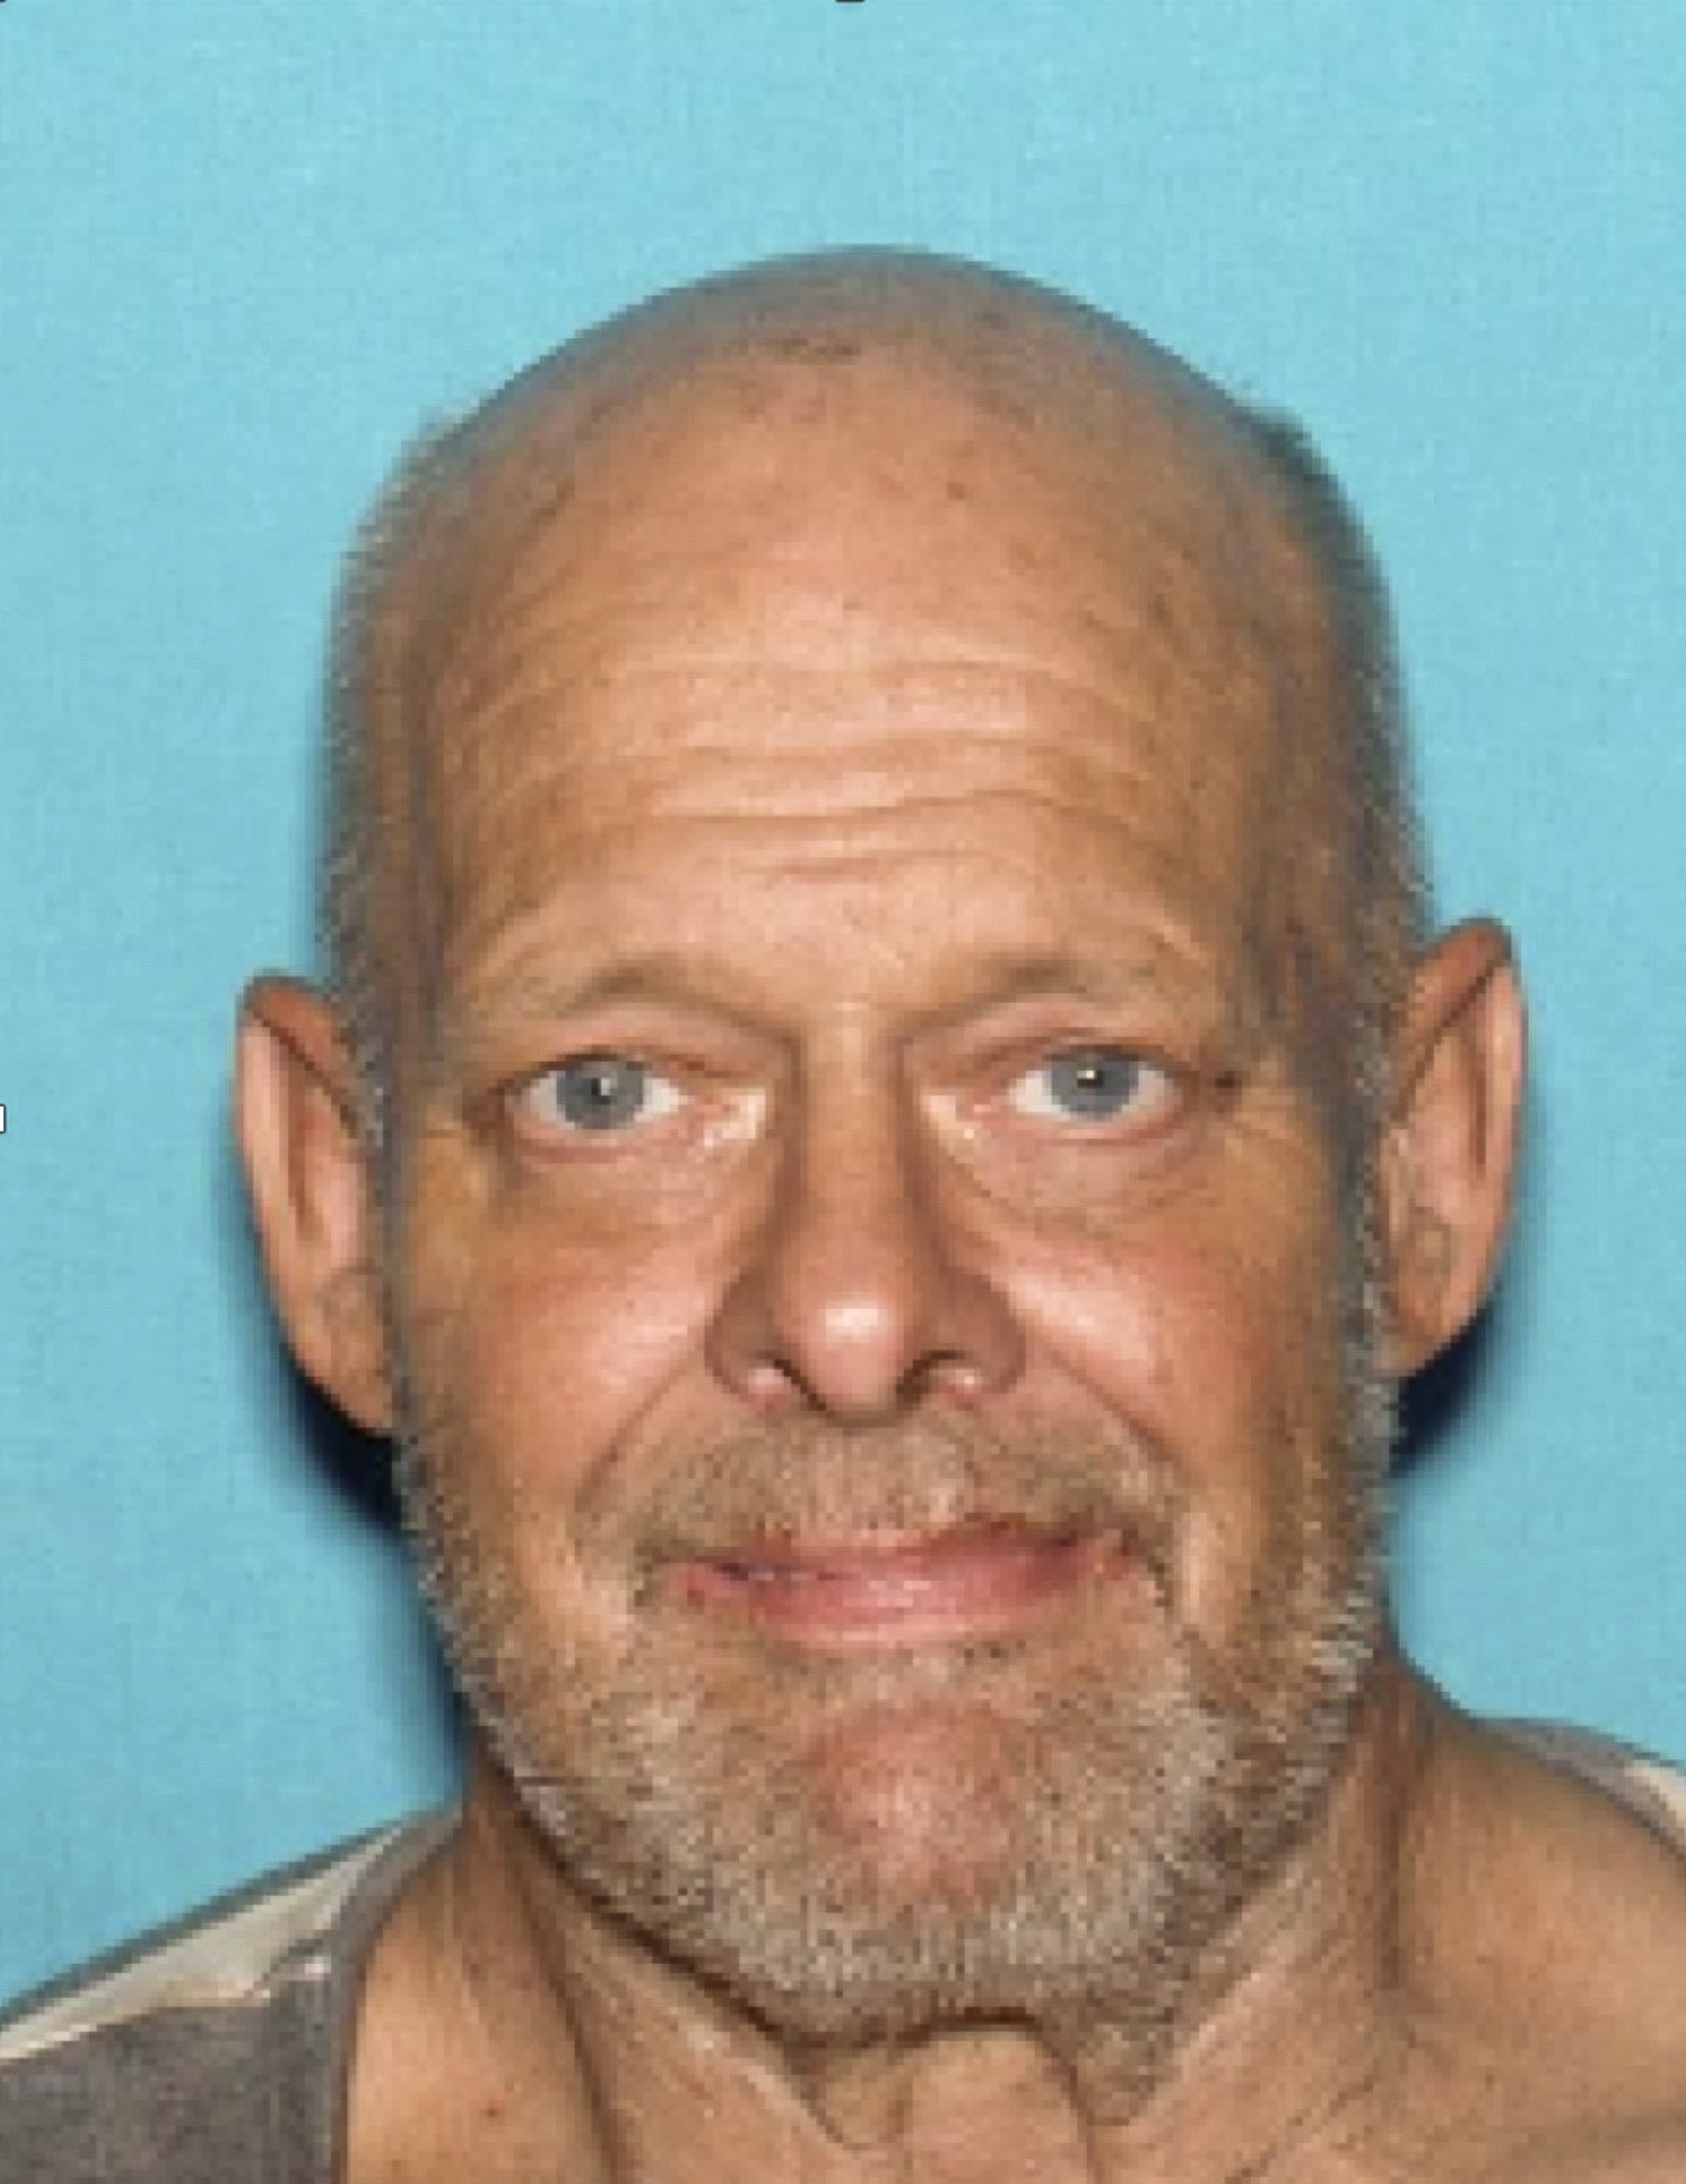 Photo released by the Los Angeles Police Department shows suspect Bruce Paddock. Authorities said the brother of Las Vegas gunman Stephen Paddock was arrested in Los Angeles on suspicion of possessing child pornography. Photo: LAPD via AP